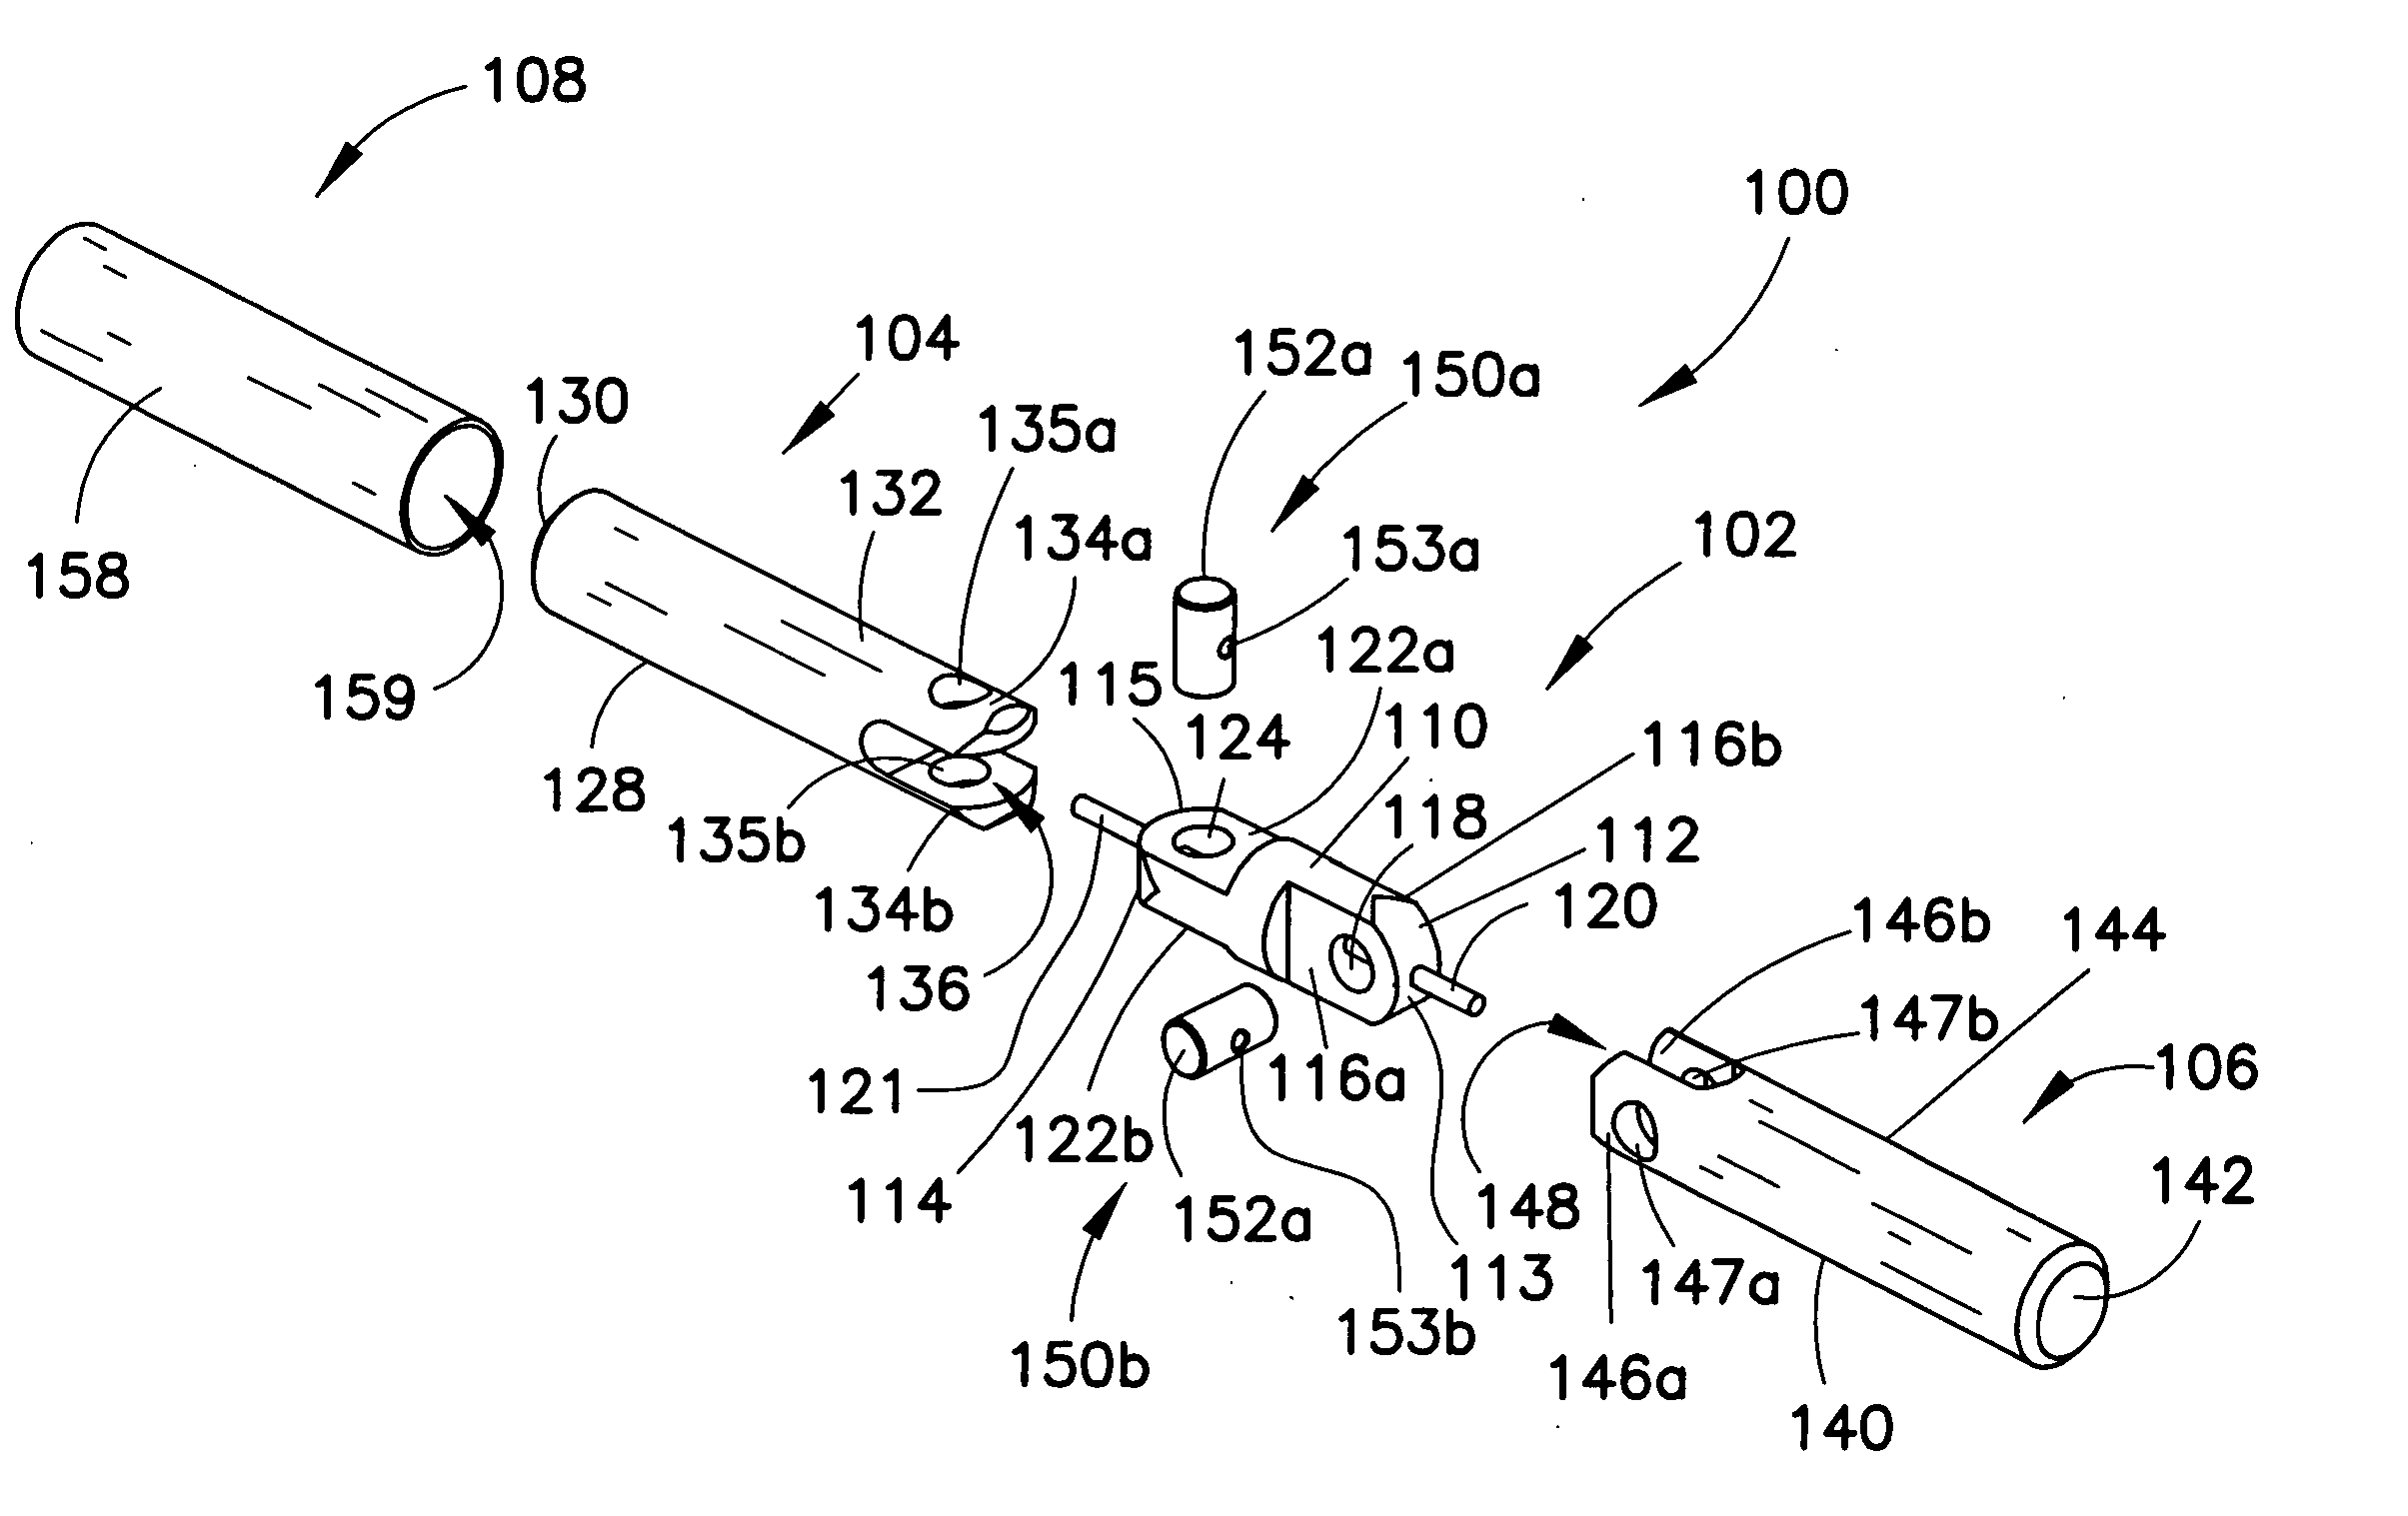 Dynamic spinal stabilization device and systems